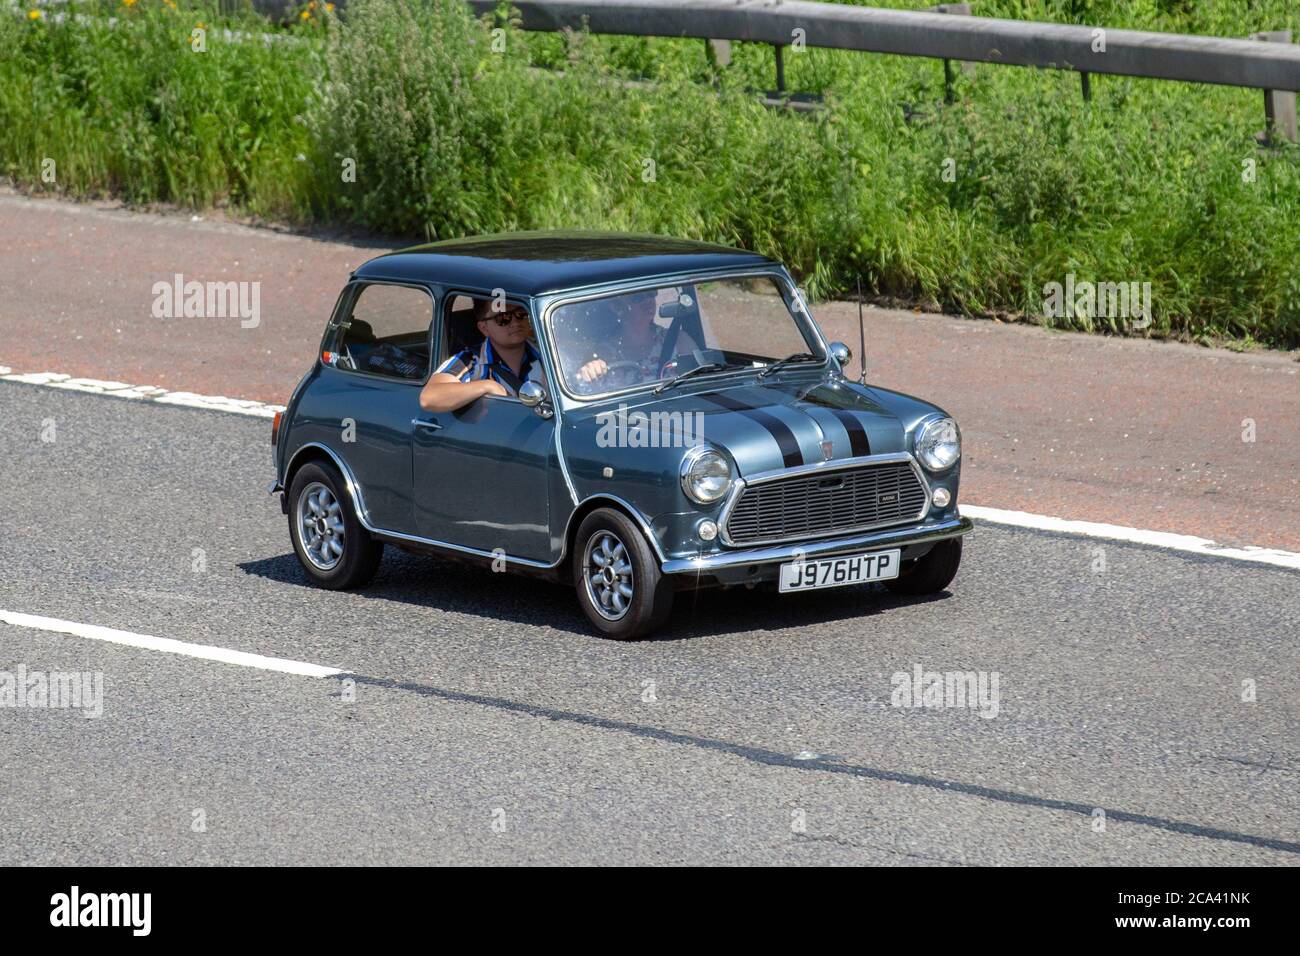 1991 90s blue Rover Mini Neon; Vehicular traffic, moving vehicles, small cars, vehicle driving on UK roads, 2dr motors, motoring on the M6 motorway highway UK road network. Stock Photo